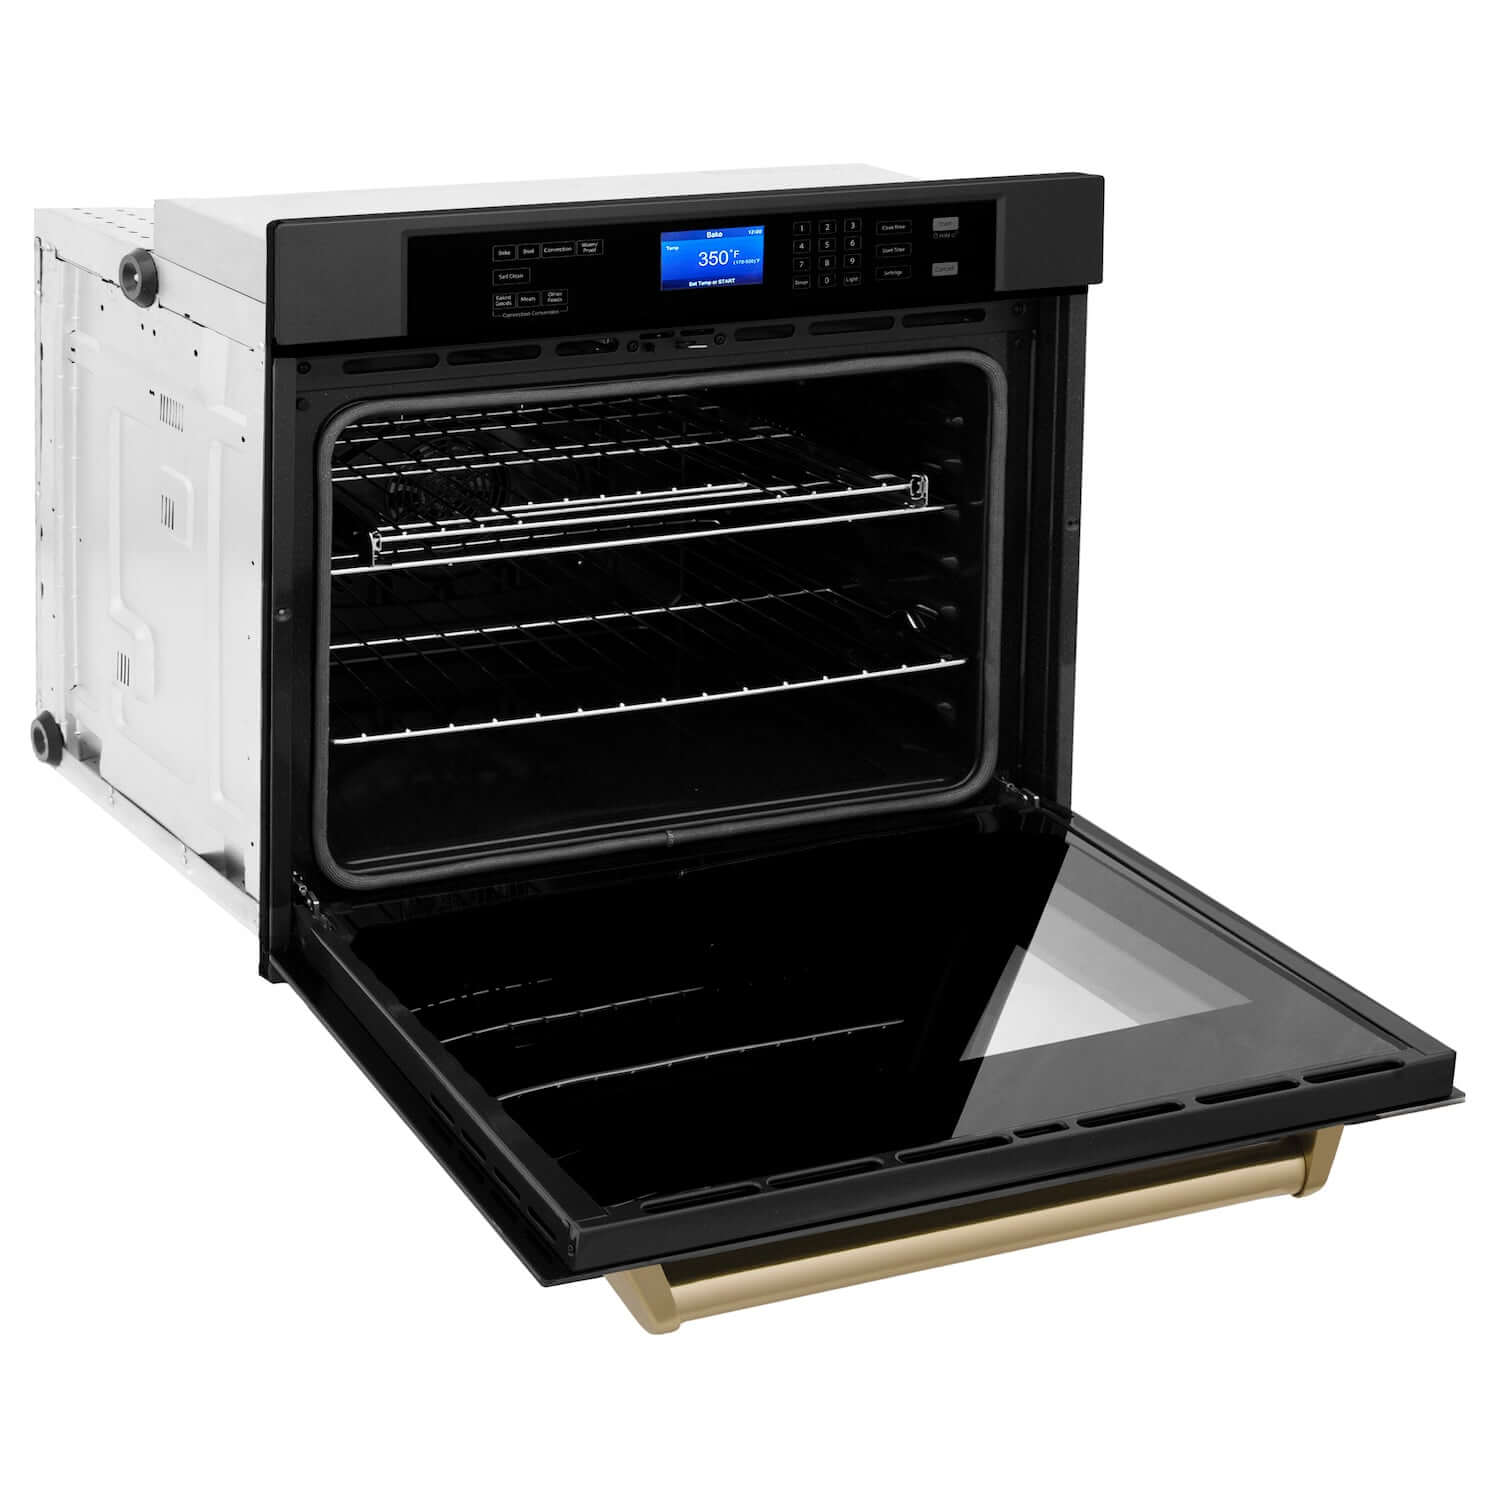 ZLINE Autograph Edition 30 in. Single Wall Oven with Self Clean and True Convection in Black Stainless Steel and Champagne Bronze Accents (AWSZ-30-BS-CB) side, open.